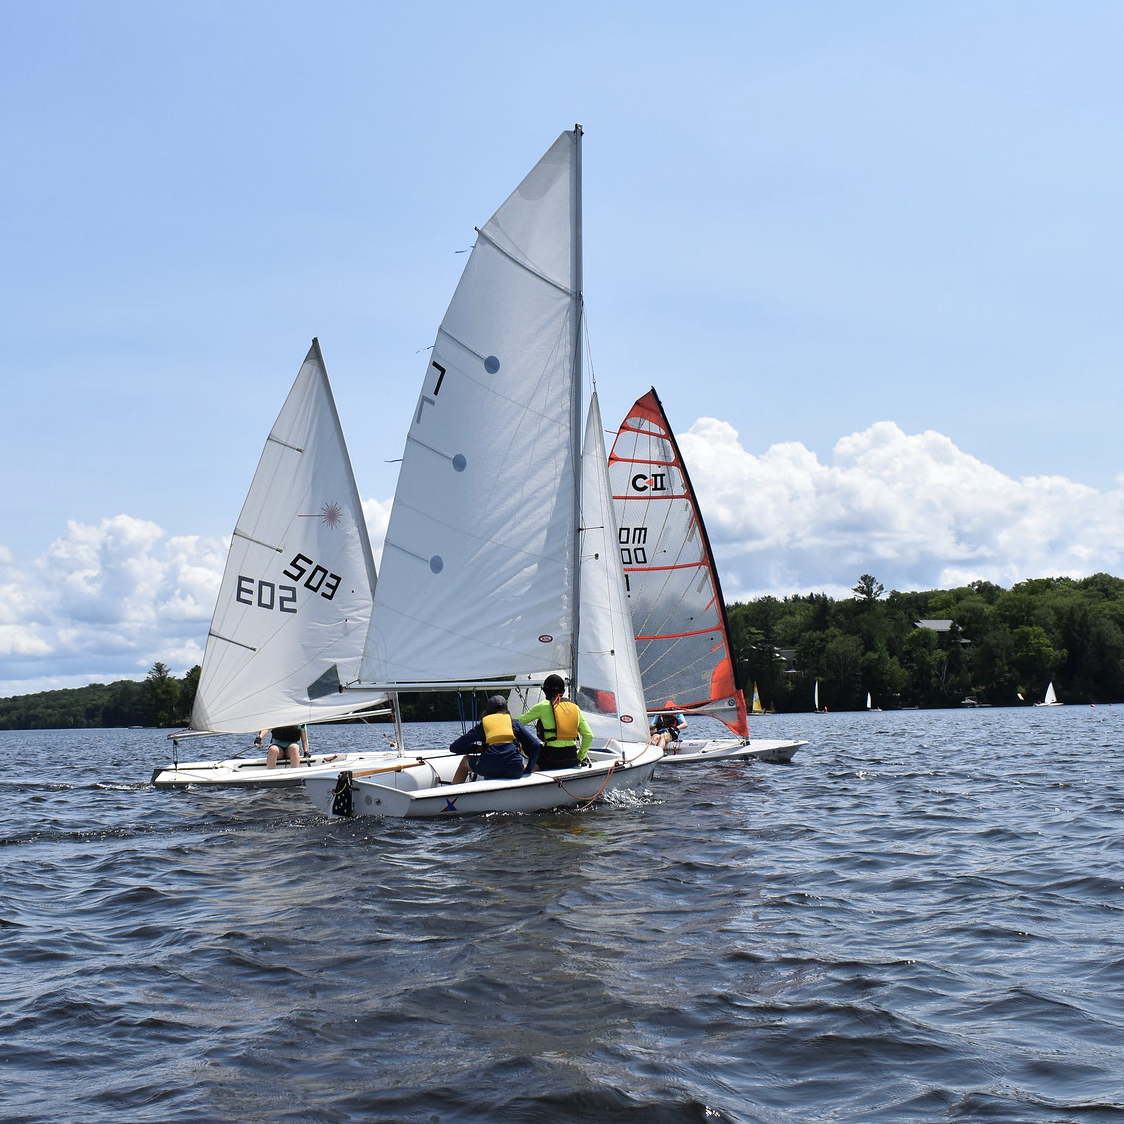 This is a photo of three sailboats: Two lasers and o Byte CII. Each boat has a skipper sailing and it's a sunny day on the water